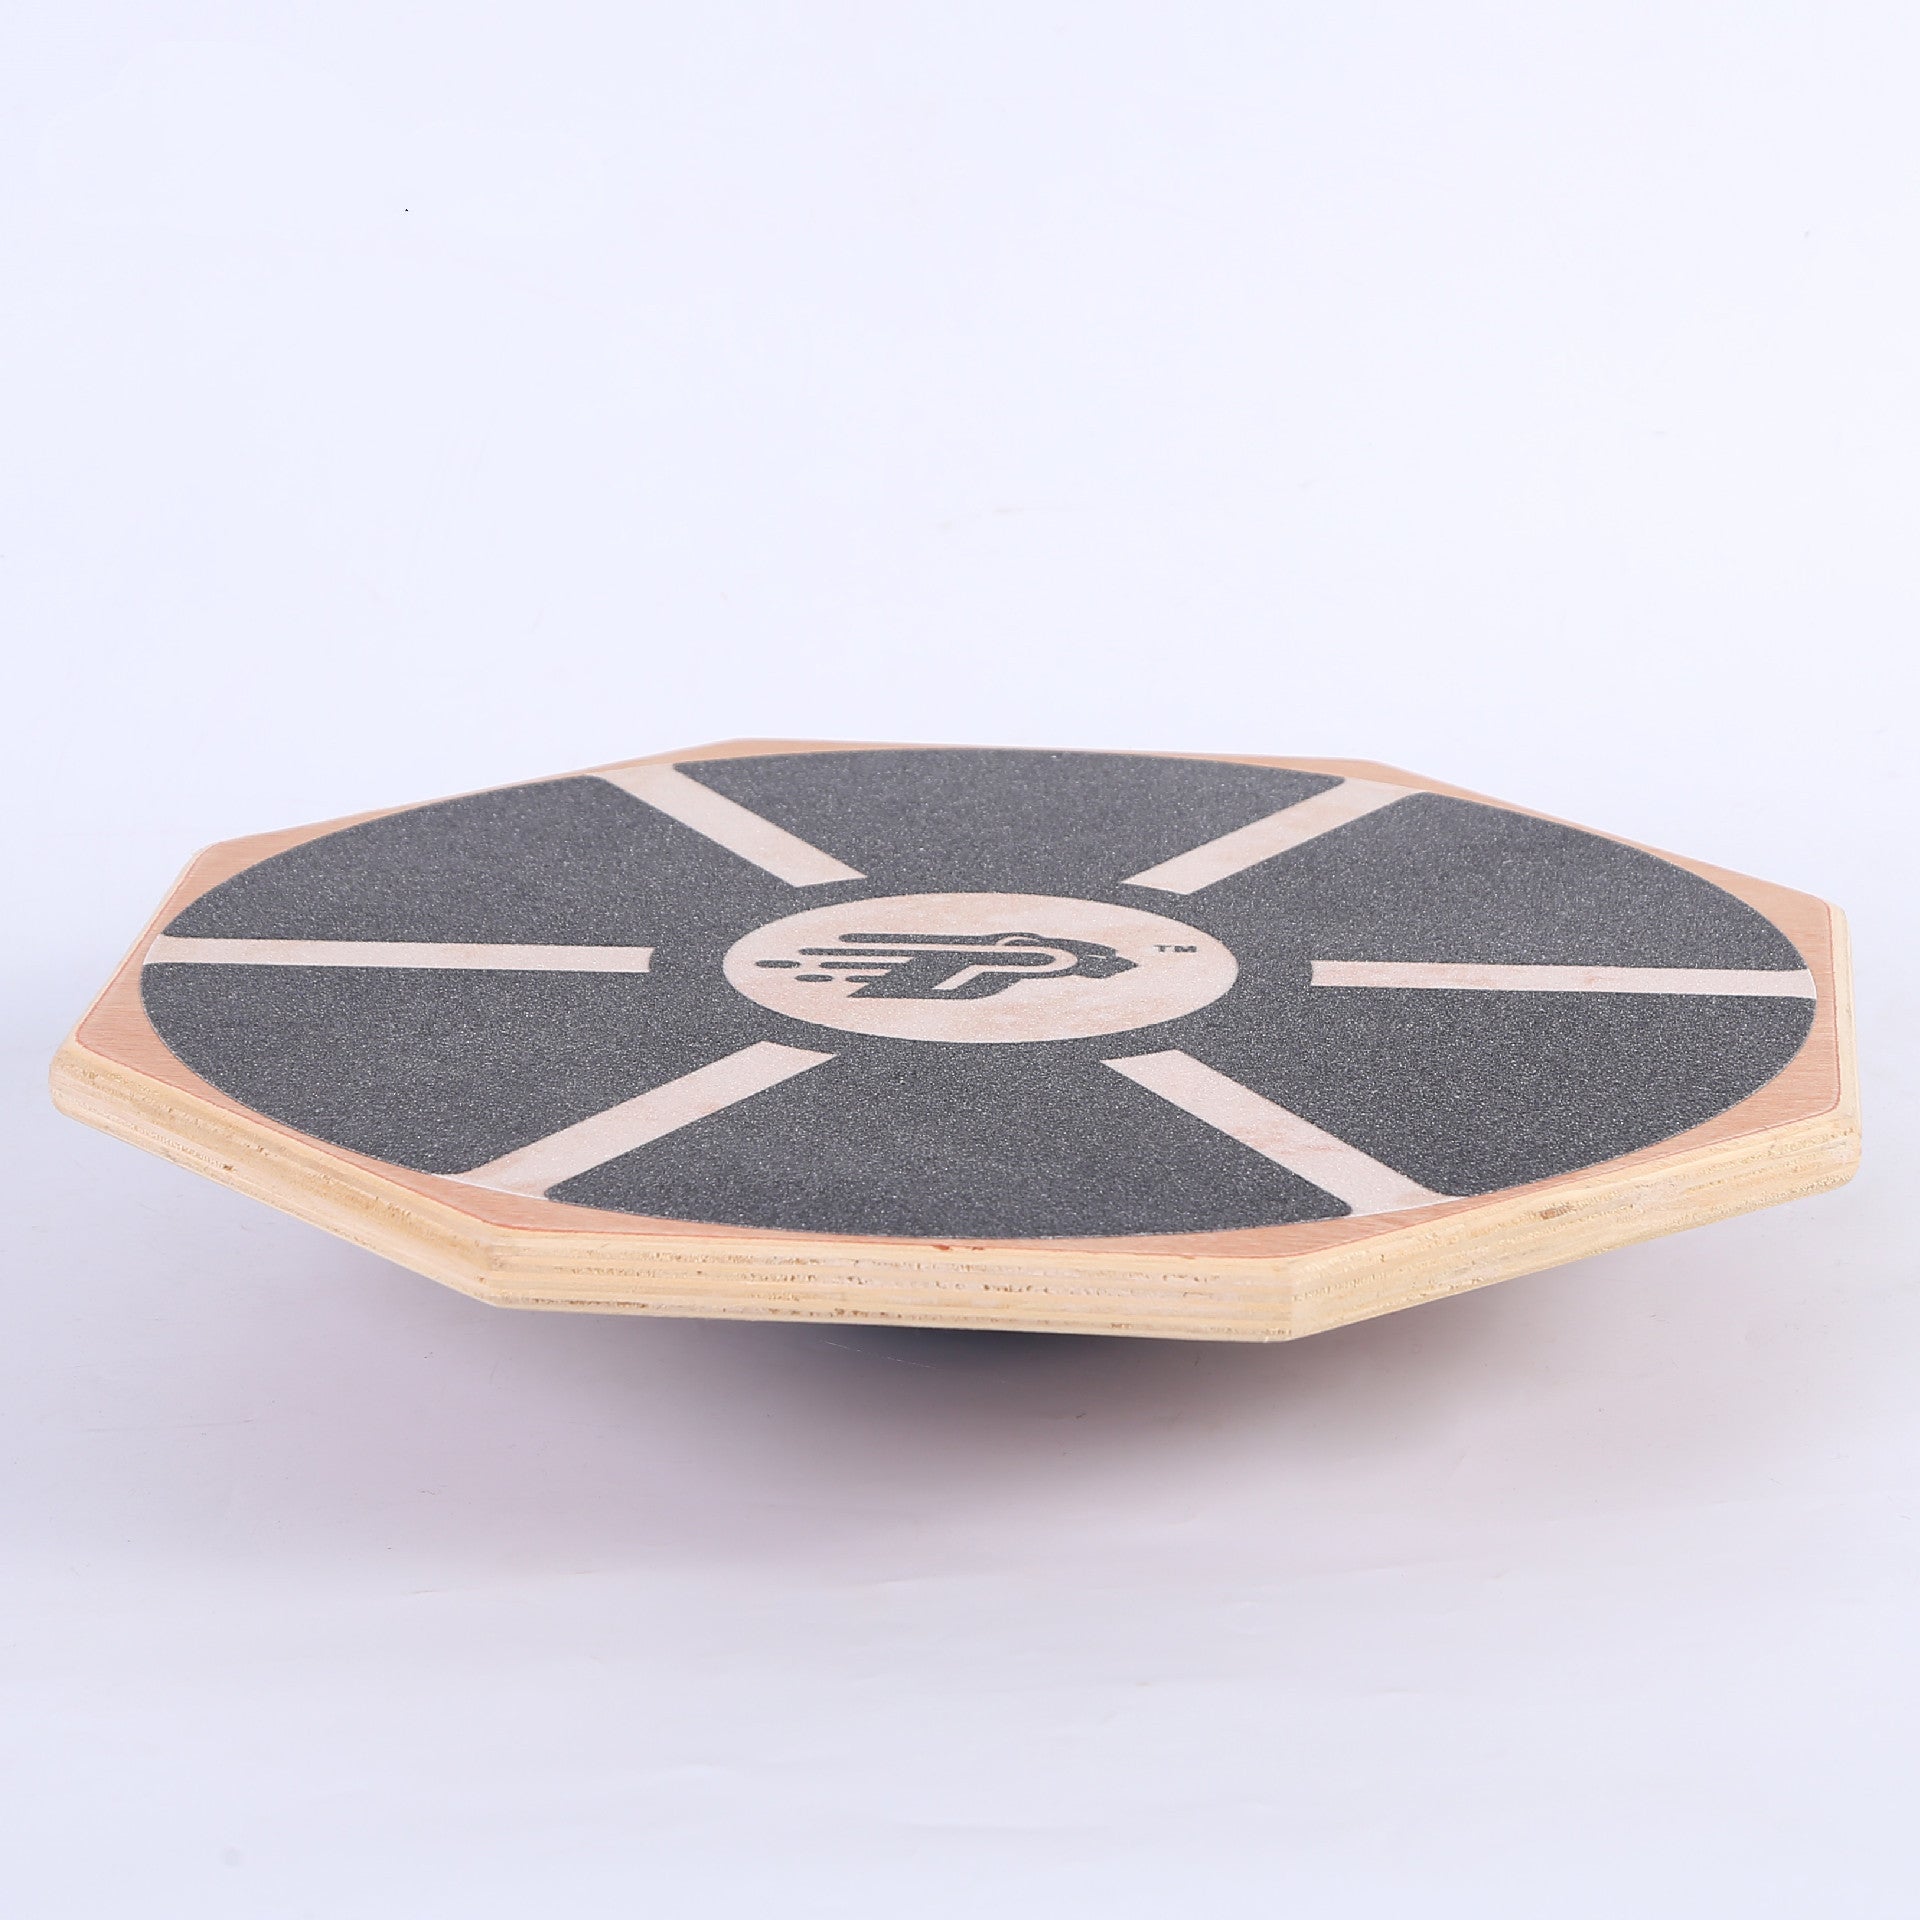 Wooden octagon balance training board with rotating board, workout balance training sport, yoga fitness tool